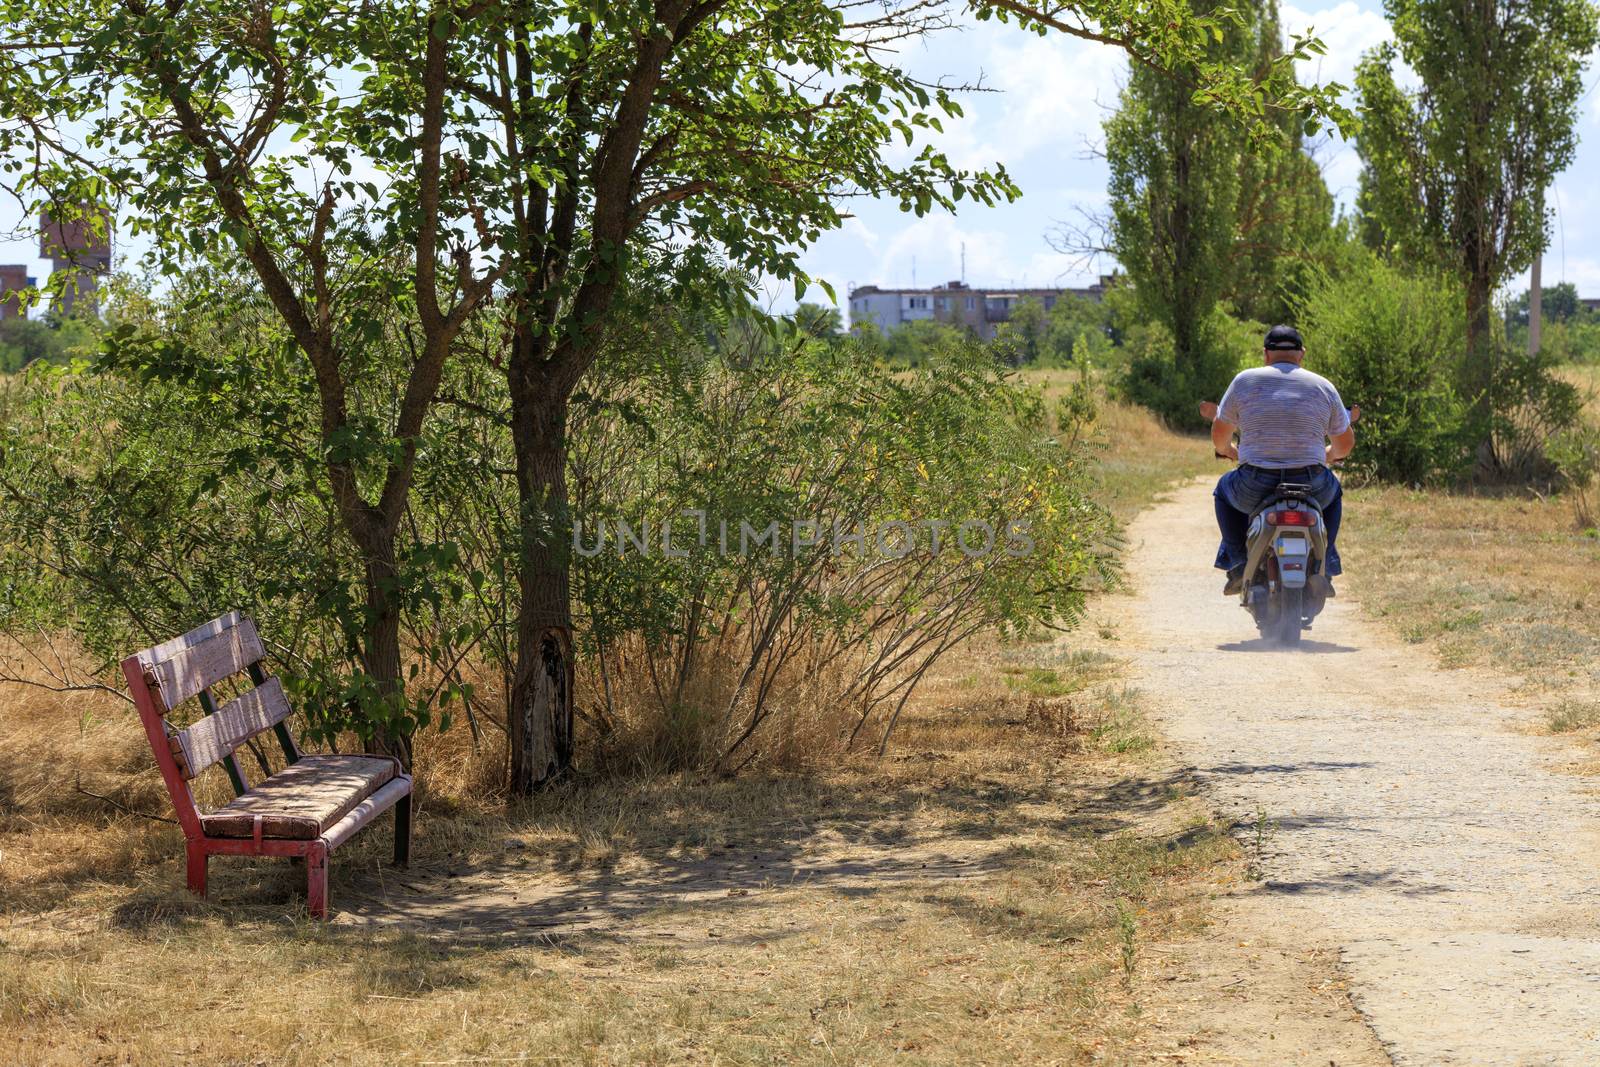 Rural still life with an old bench, a resident on a scooter and an old road. by Sergii